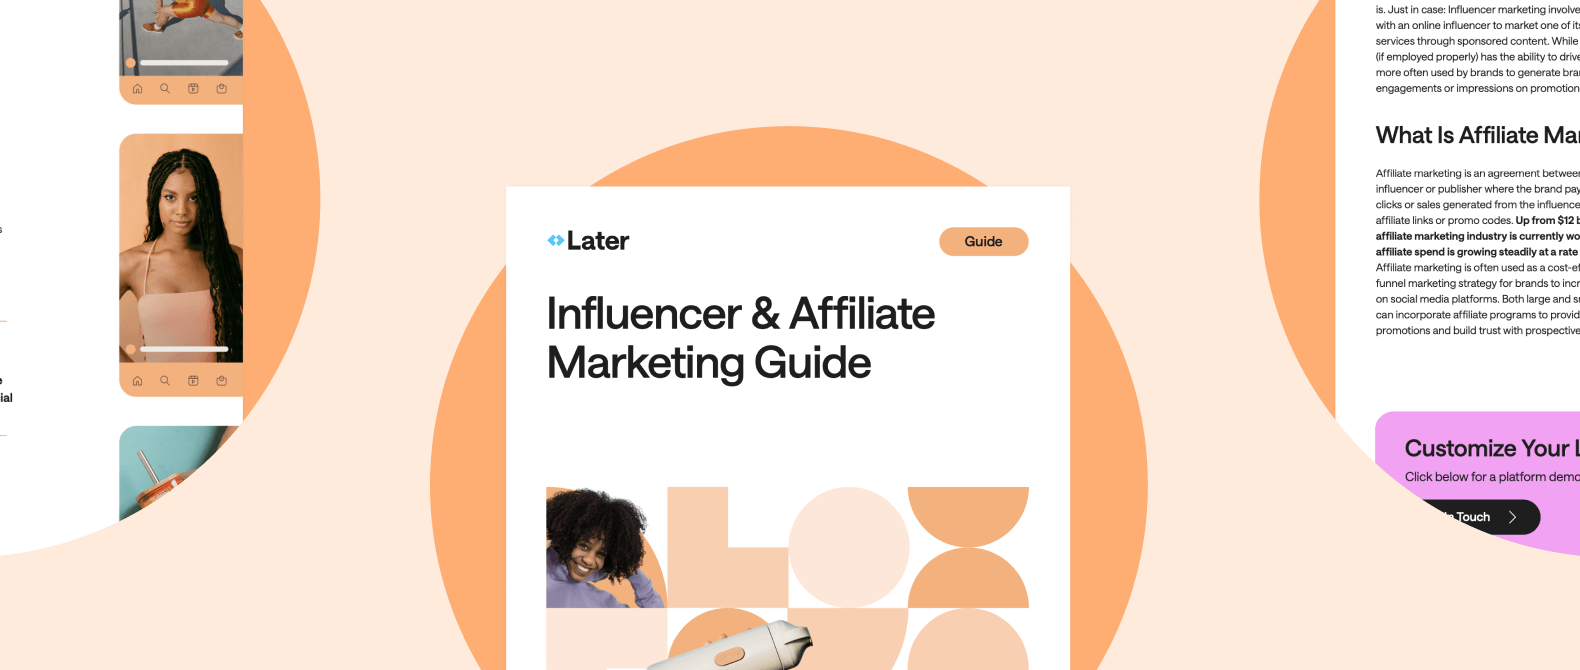 Free influencer and affiliate marketing guide for brand marketers.